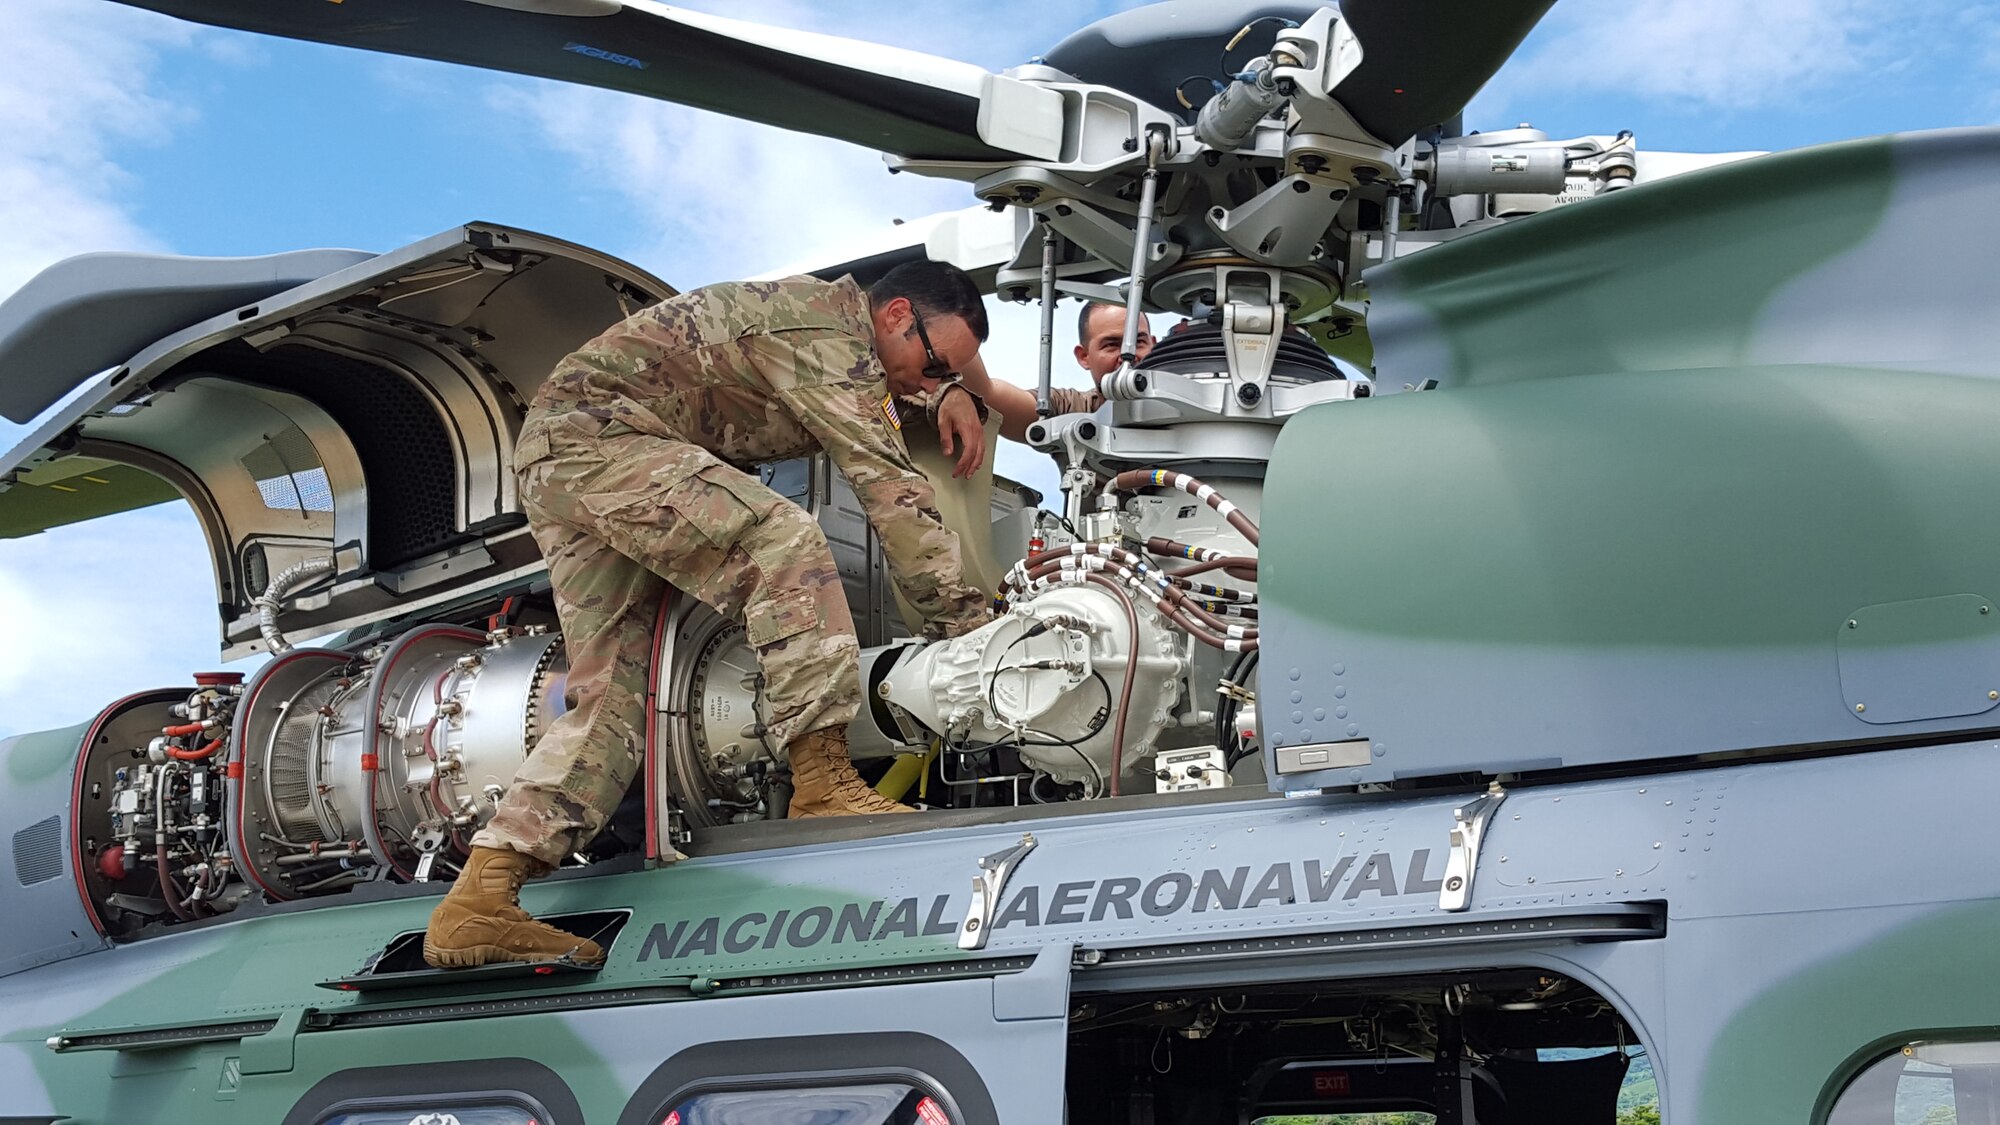 Master Sgt. Raphael Romero, 571st Mobility Support Advisory Squadron aircraft maintenance senior air advisor, performs a post-flight inspection on an Augusta Westland AW-139 helicopter engine along with the National Air and Naval Service of Panama flying crew chief at Nicanor Air Base, Panama. Air advisors assess, train, advise and assist U.S. Southern Command lines of effort of strengthening partnerships and countering threats from transnational criminal organizations. (Courtesy Photo)